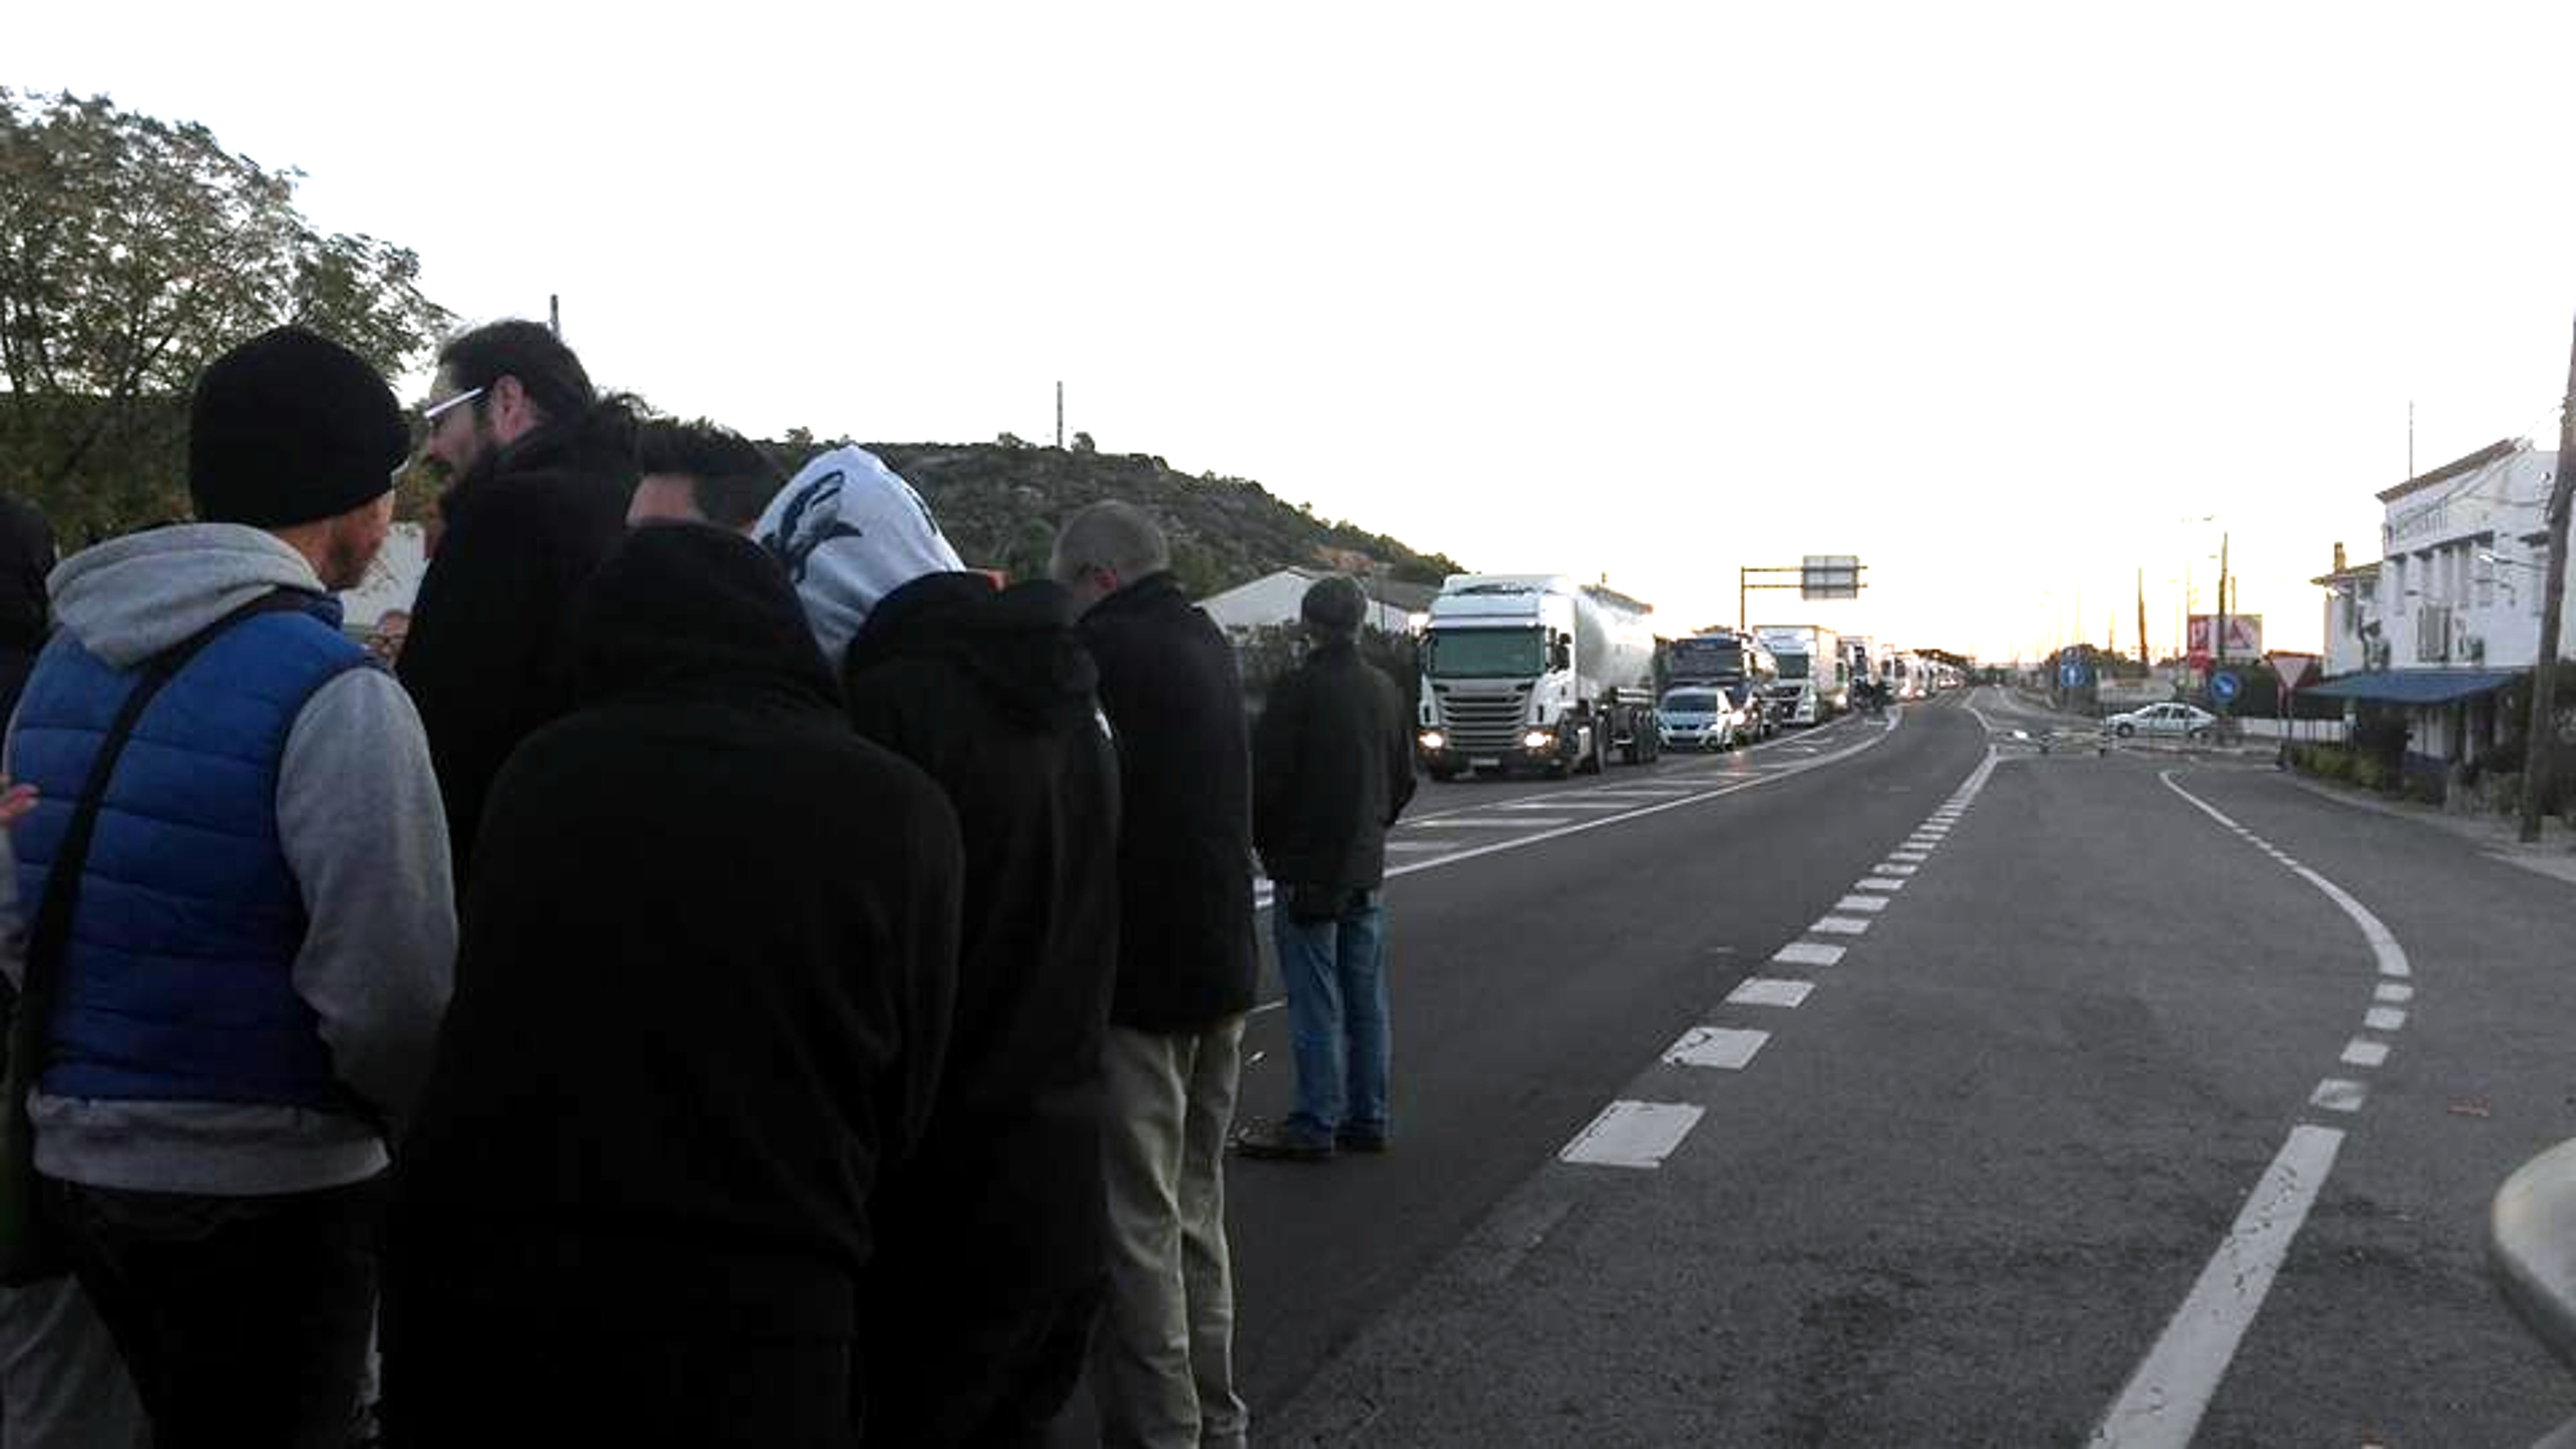 Some citizens blocking N-340 road in Southern Catalonia